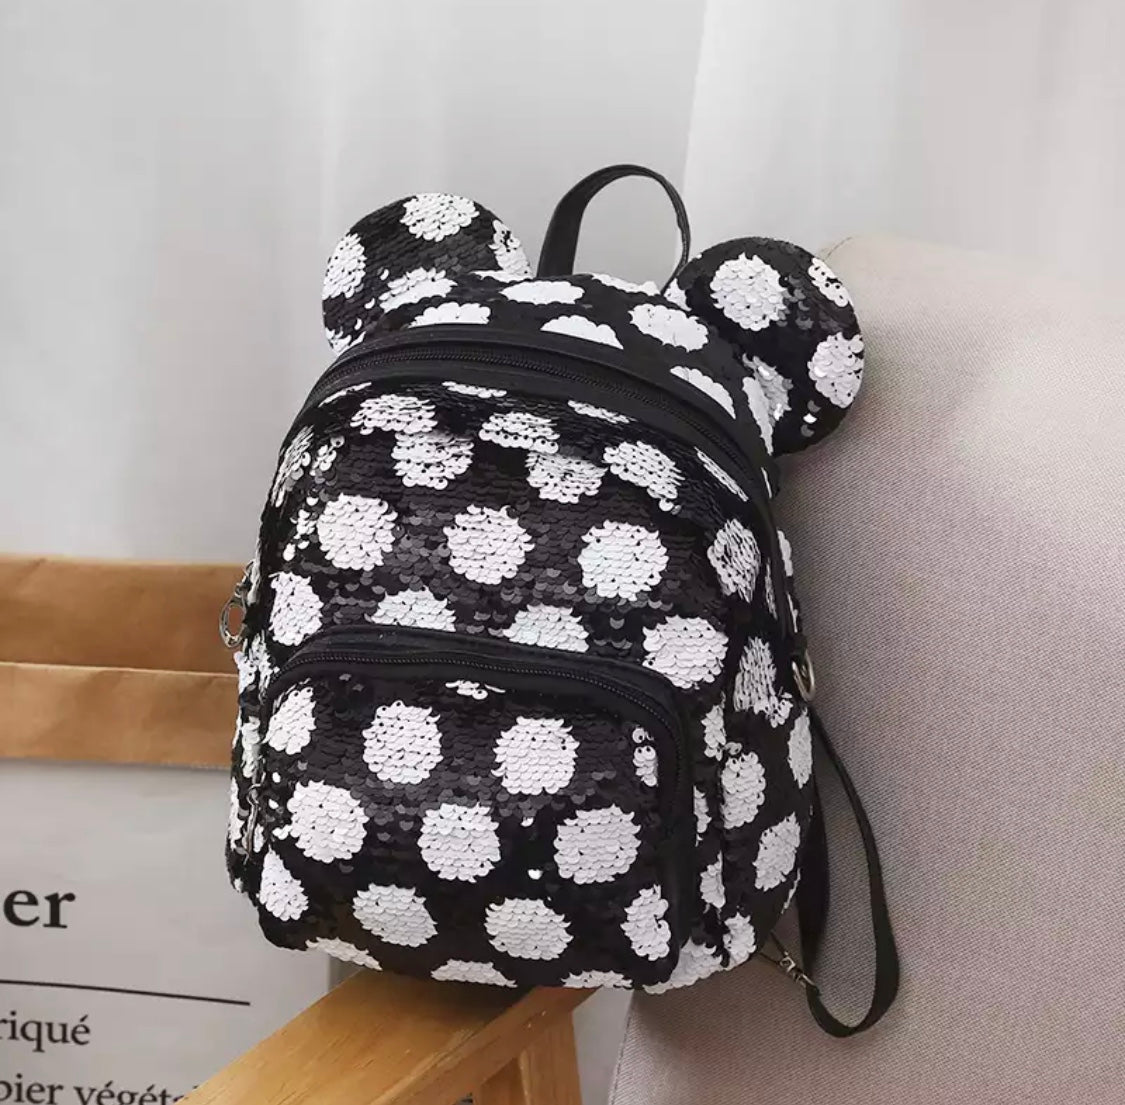 DDLGVERSE Mini Sequin Mouse Backpack Black with White Spots